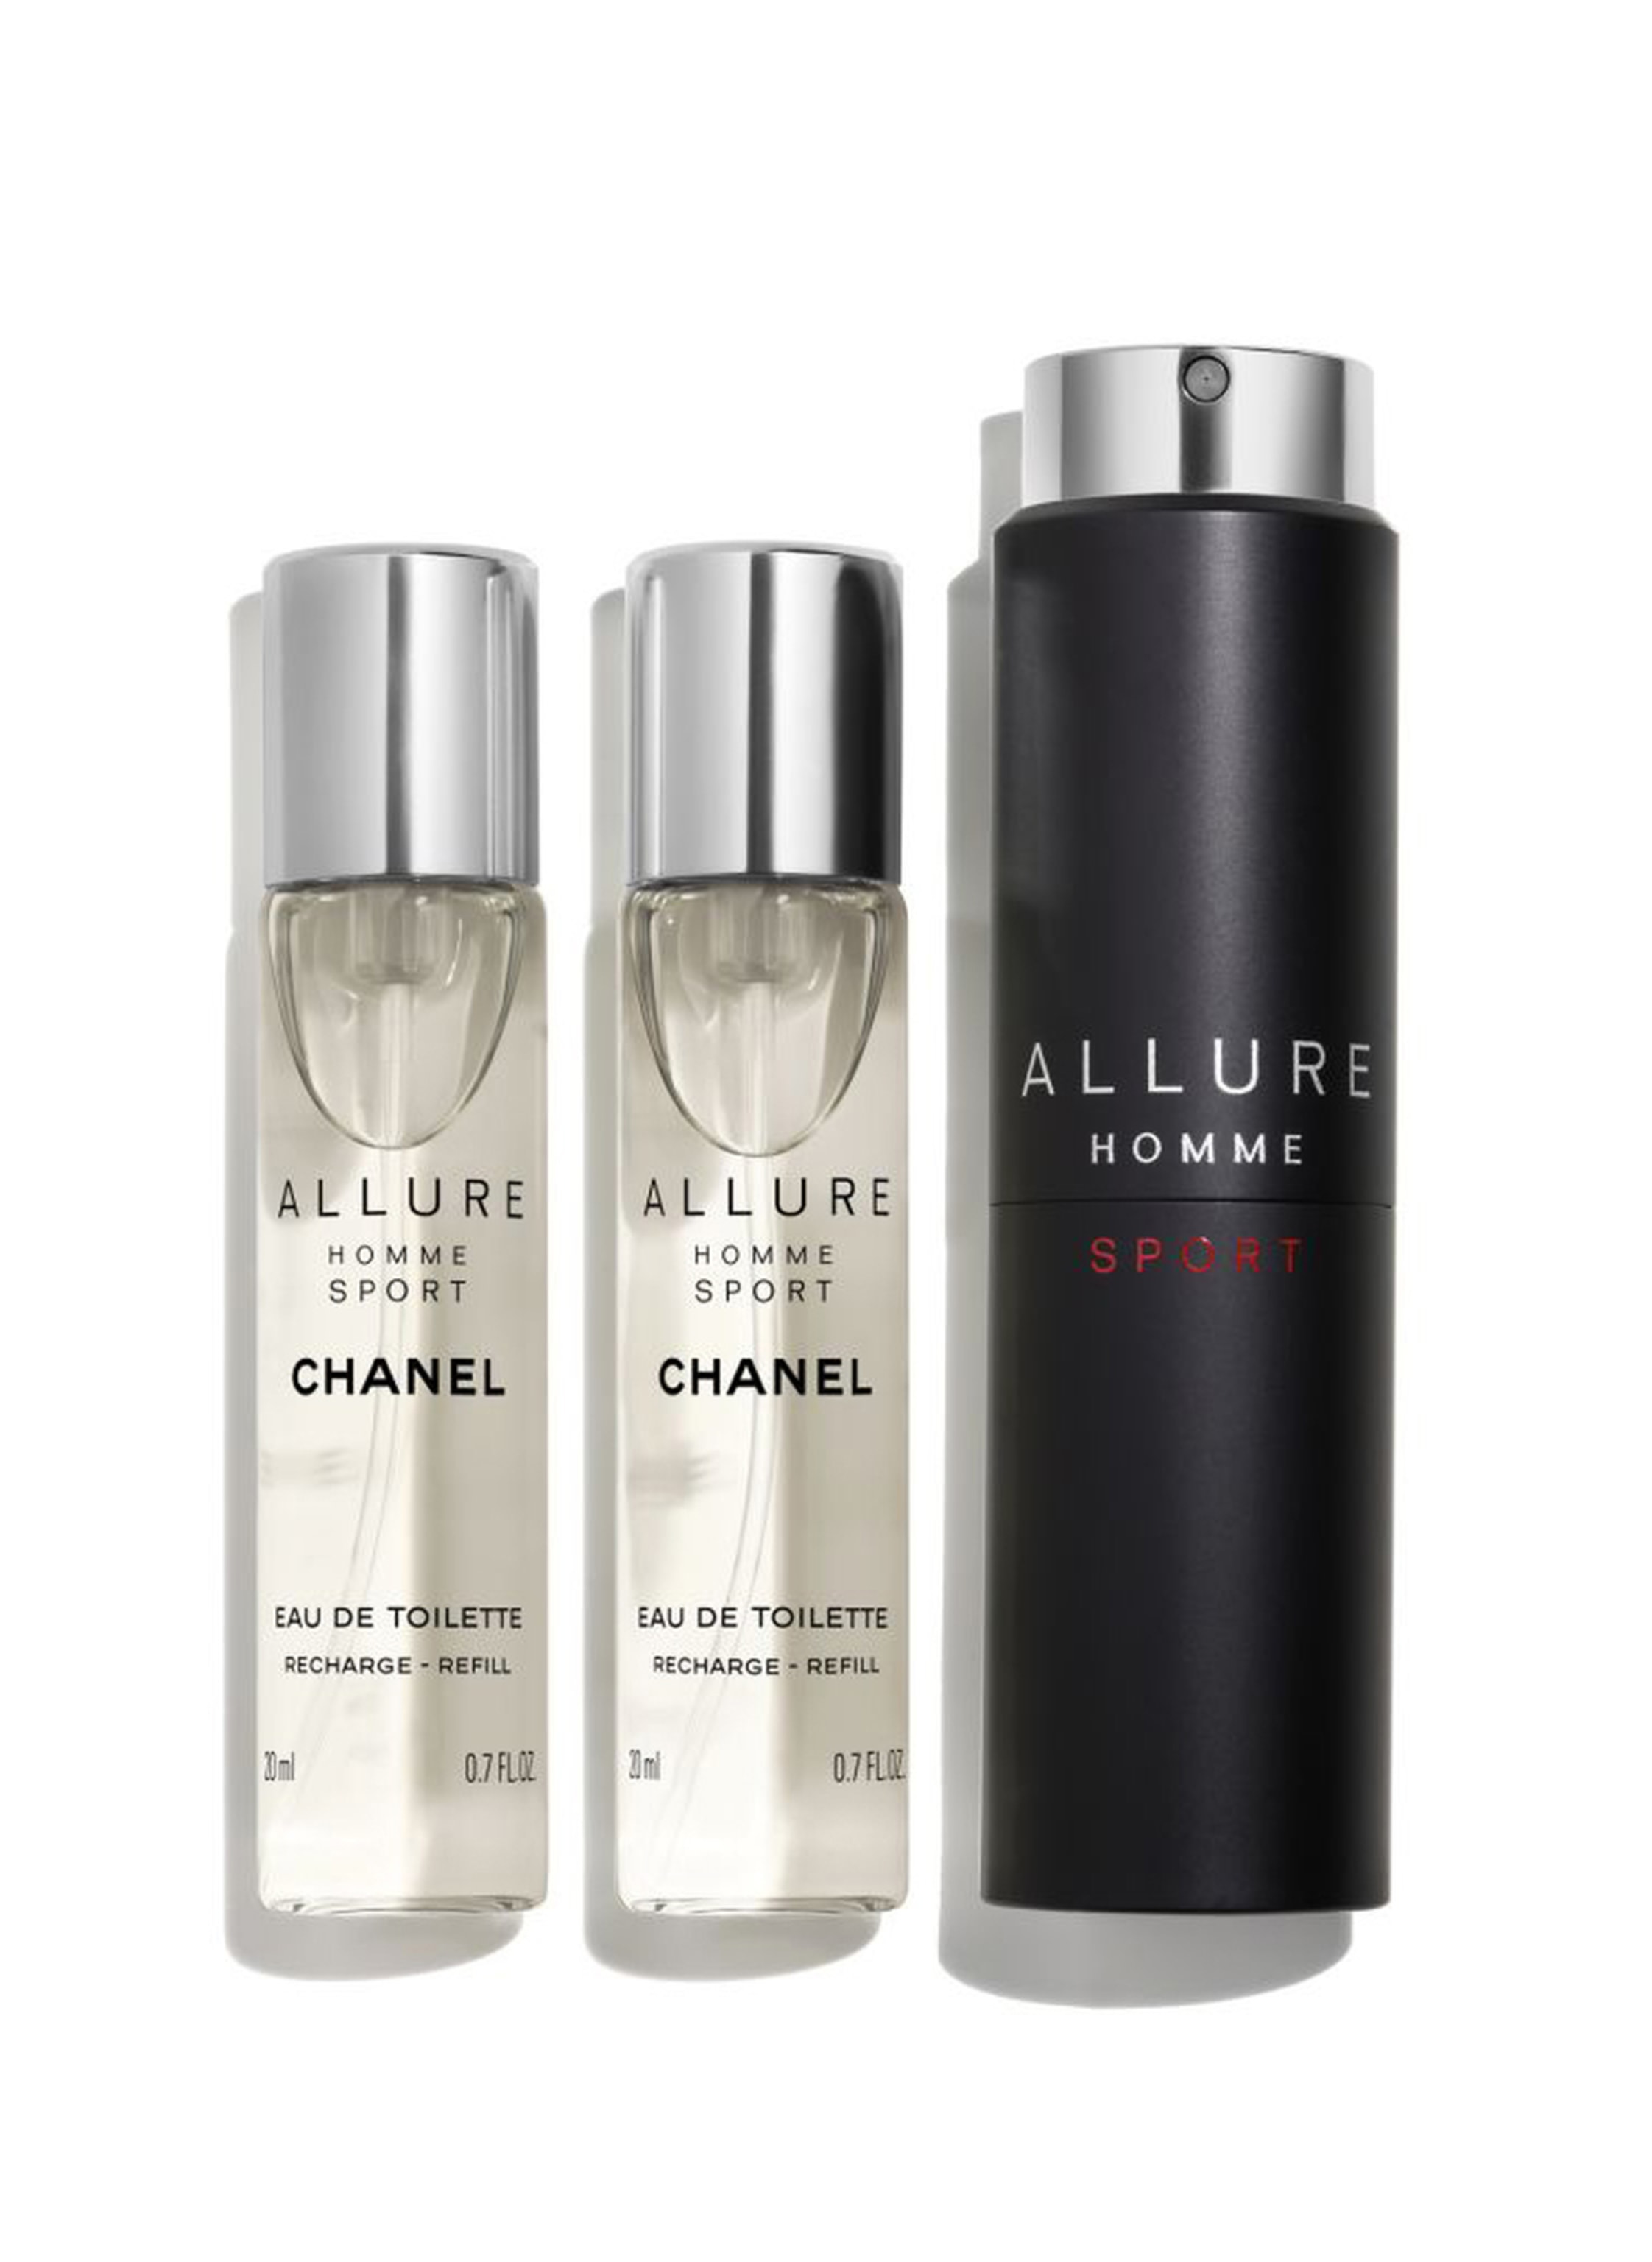 Buy Chanel Allure Homme Deodorant Stick online at a great price